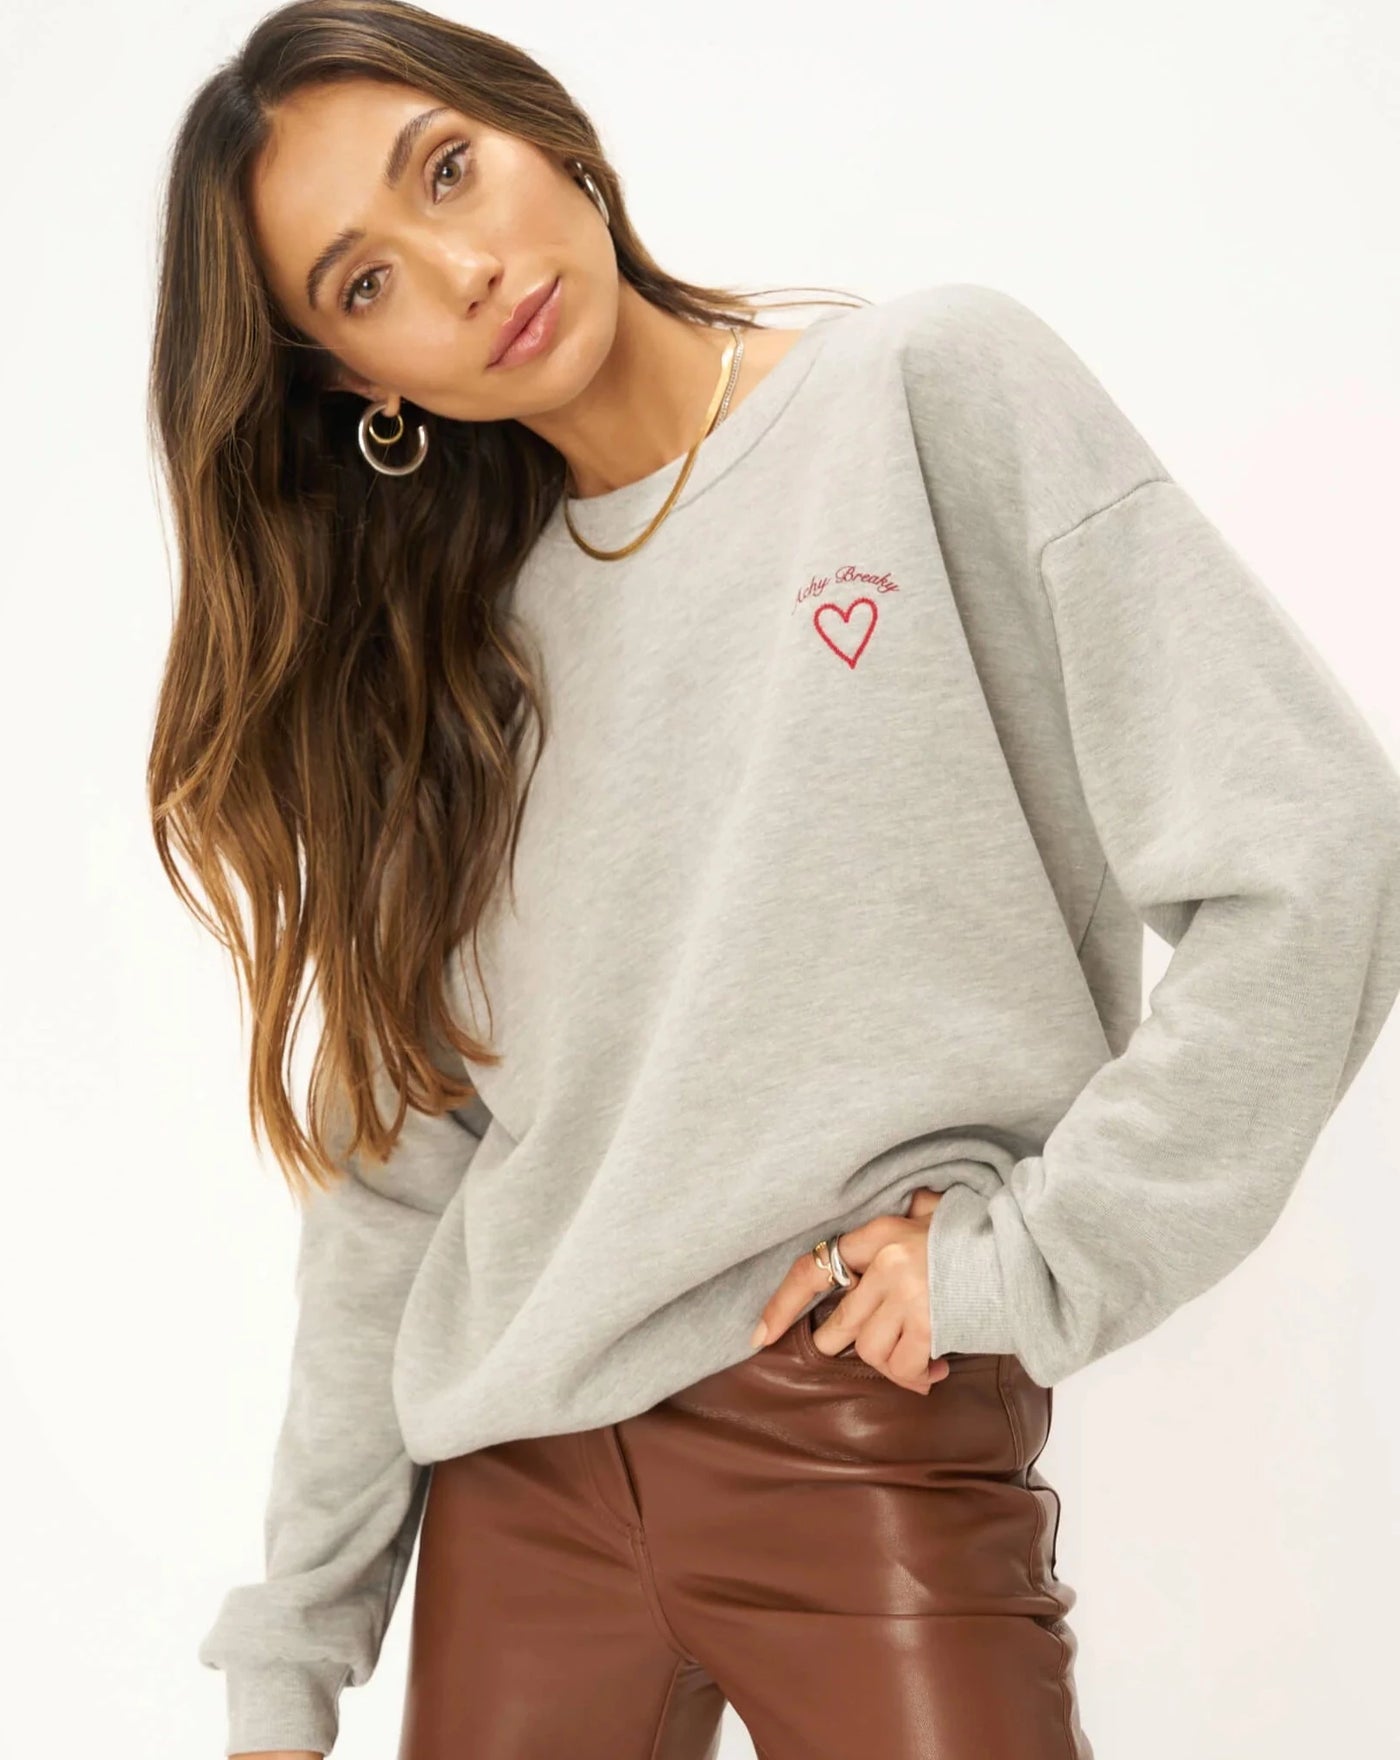 Achy Breaky Embroidered Sweatshirt